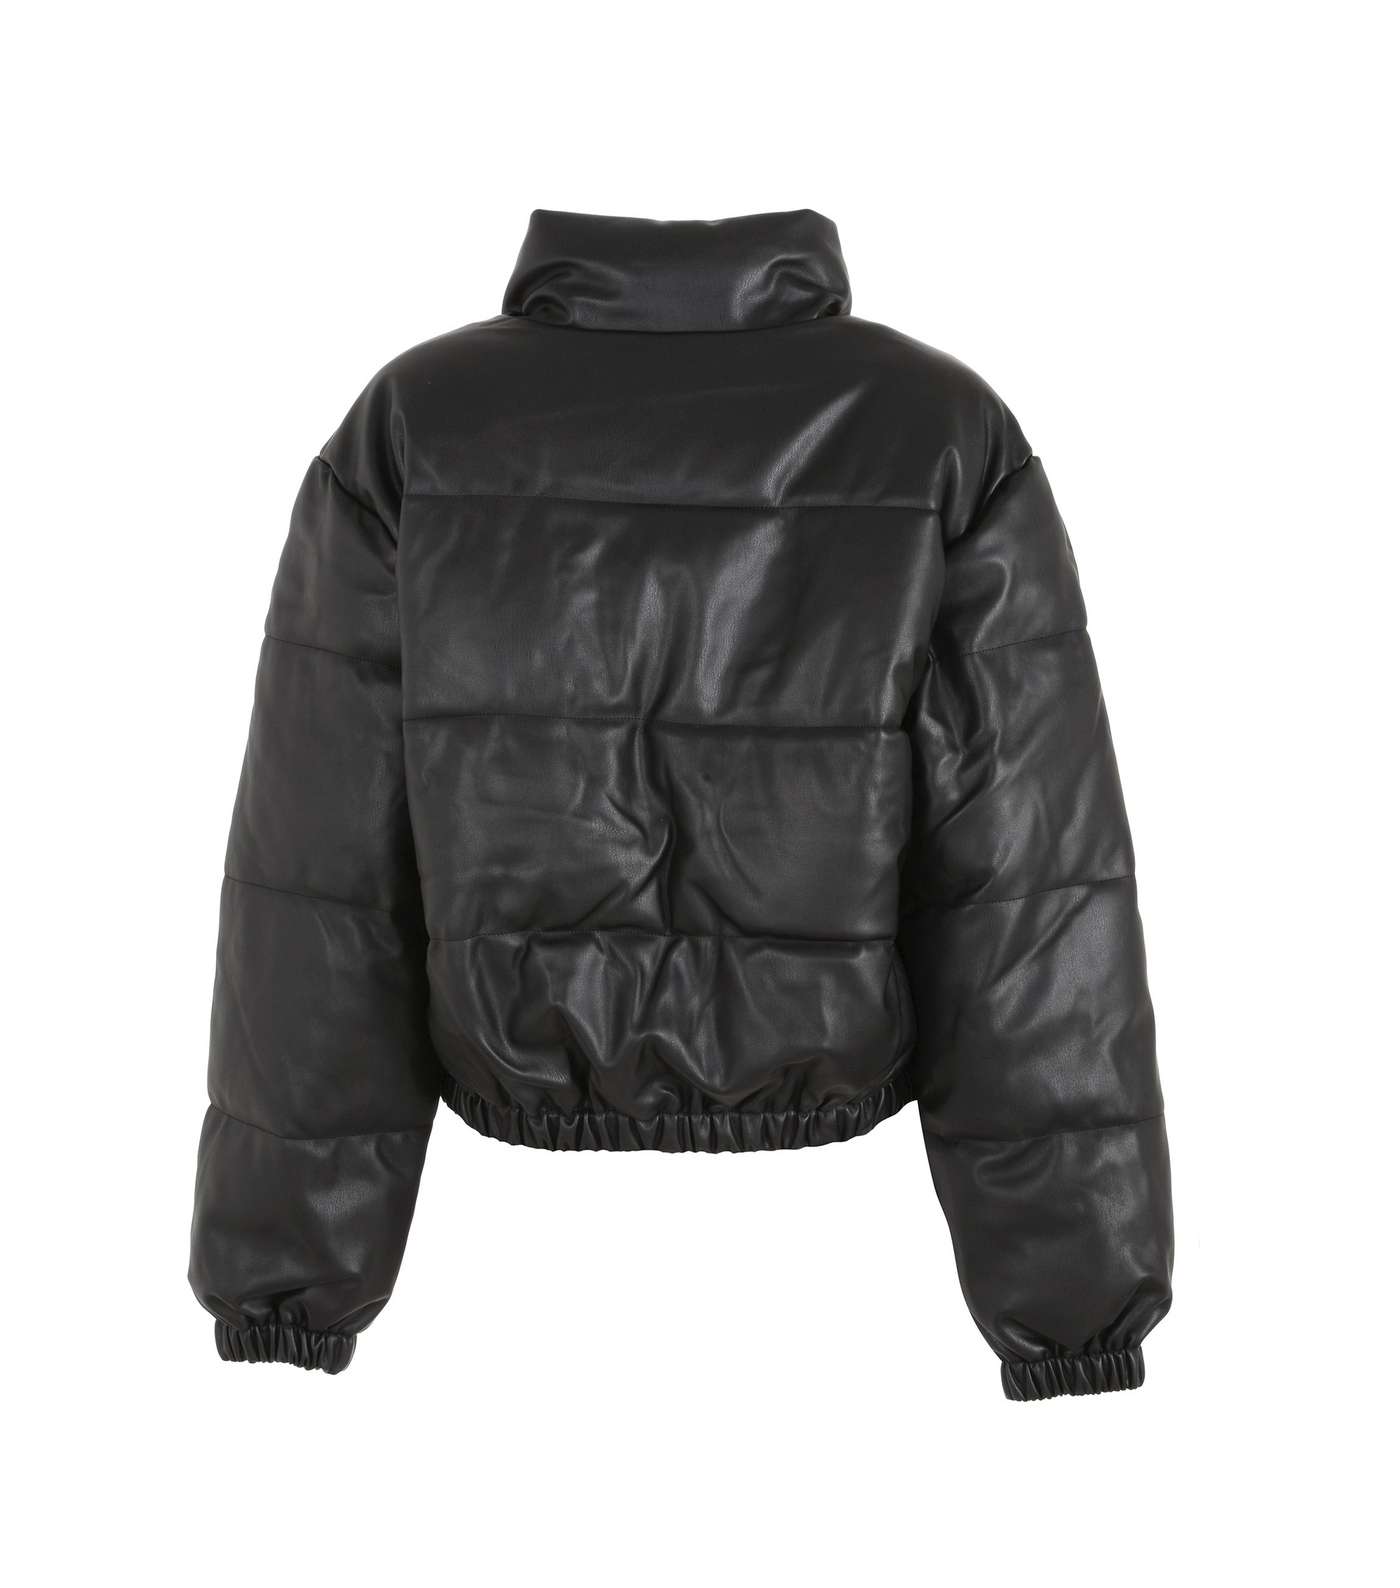 Urban Bliss Black Leather-Look Puffer Coat Image 2